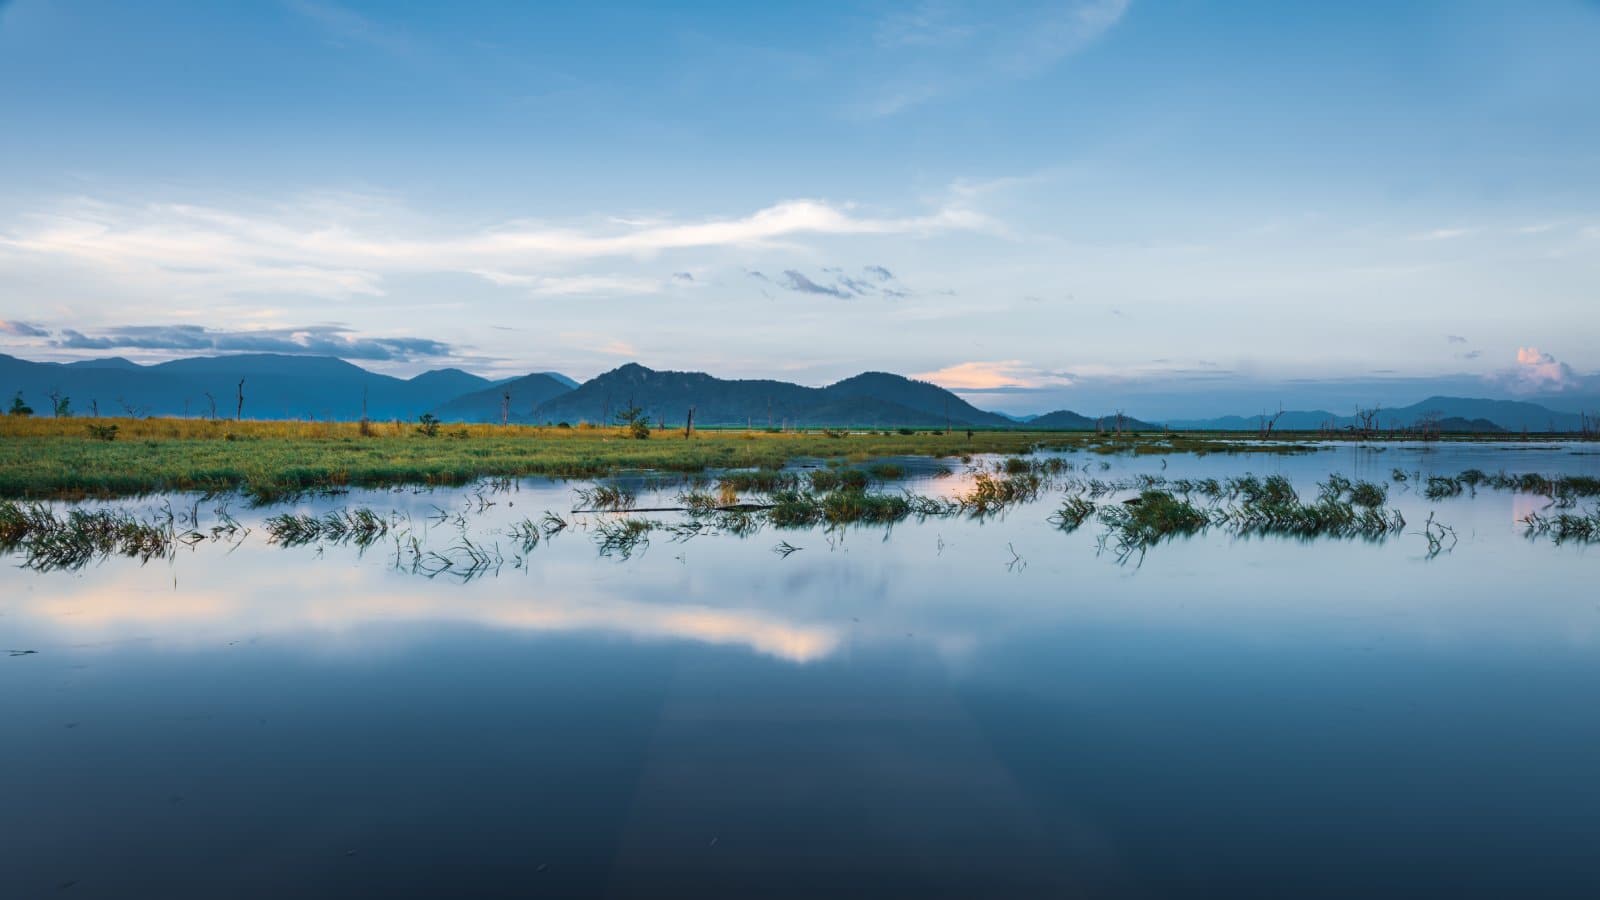 <p class="wp-caption-text">Image Credit: Shutterstock / Pagnarith Sao</p>  <p><span>The Cardamom Mountains in southwest Cambodia offer one of Southeast Asia’s last unspoiled wilderness areas. Veterans leading treks in this biodiverse region share stories of its strategic importance during Cambodia’s years of conflict and its role as a refuge for endangered wildlife. The dense jungles, waterfalls, and remote villages provide a backdrop for discussions on conservation efforts and the challenges of protecting such a vital ecosystem in the post-conflict era.</span></p>